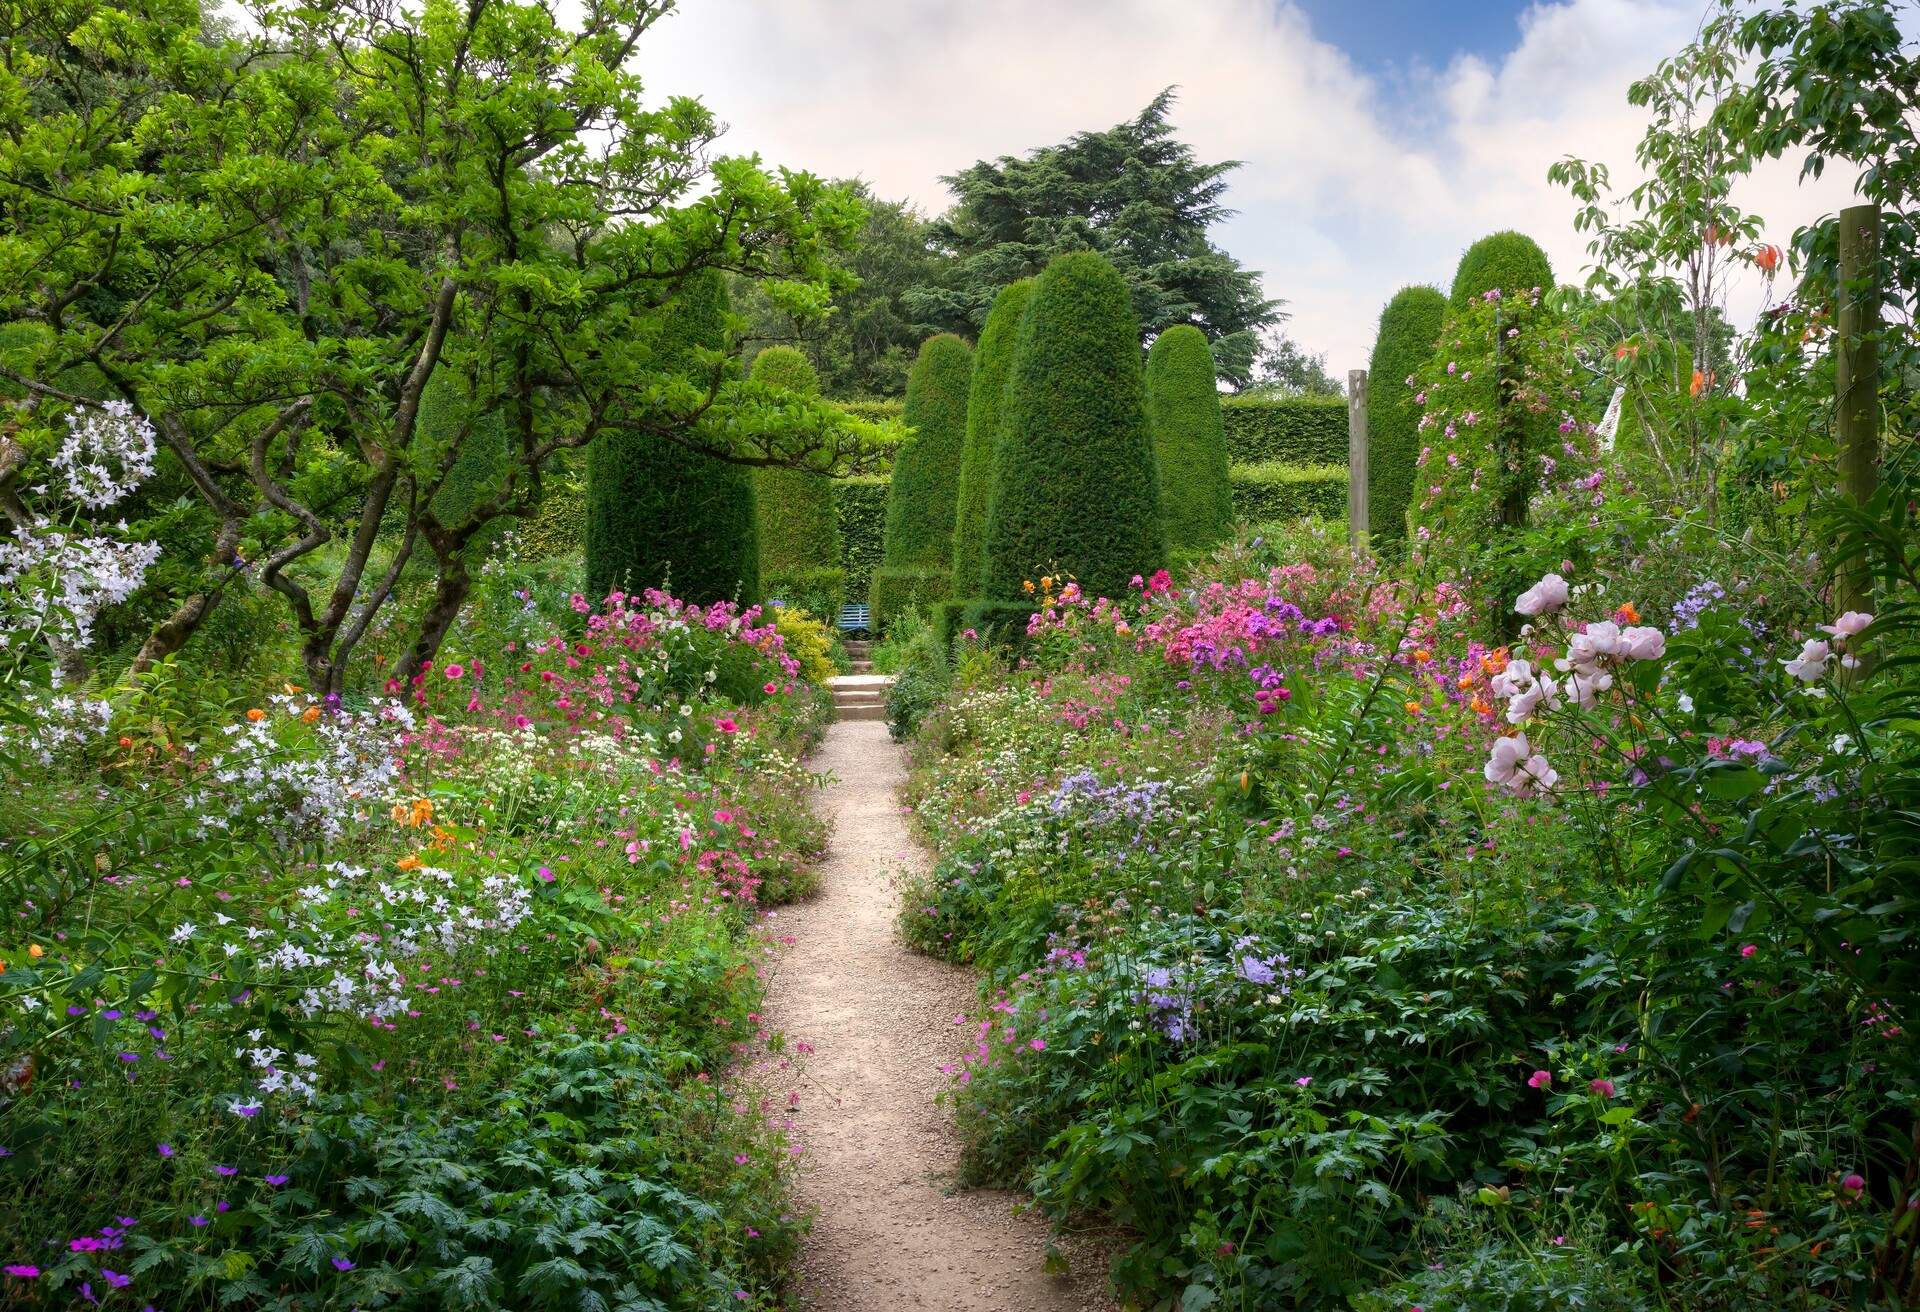 DEST_UK_ENGLAND_COUNTRY GARDEN_GettyImages-491547144